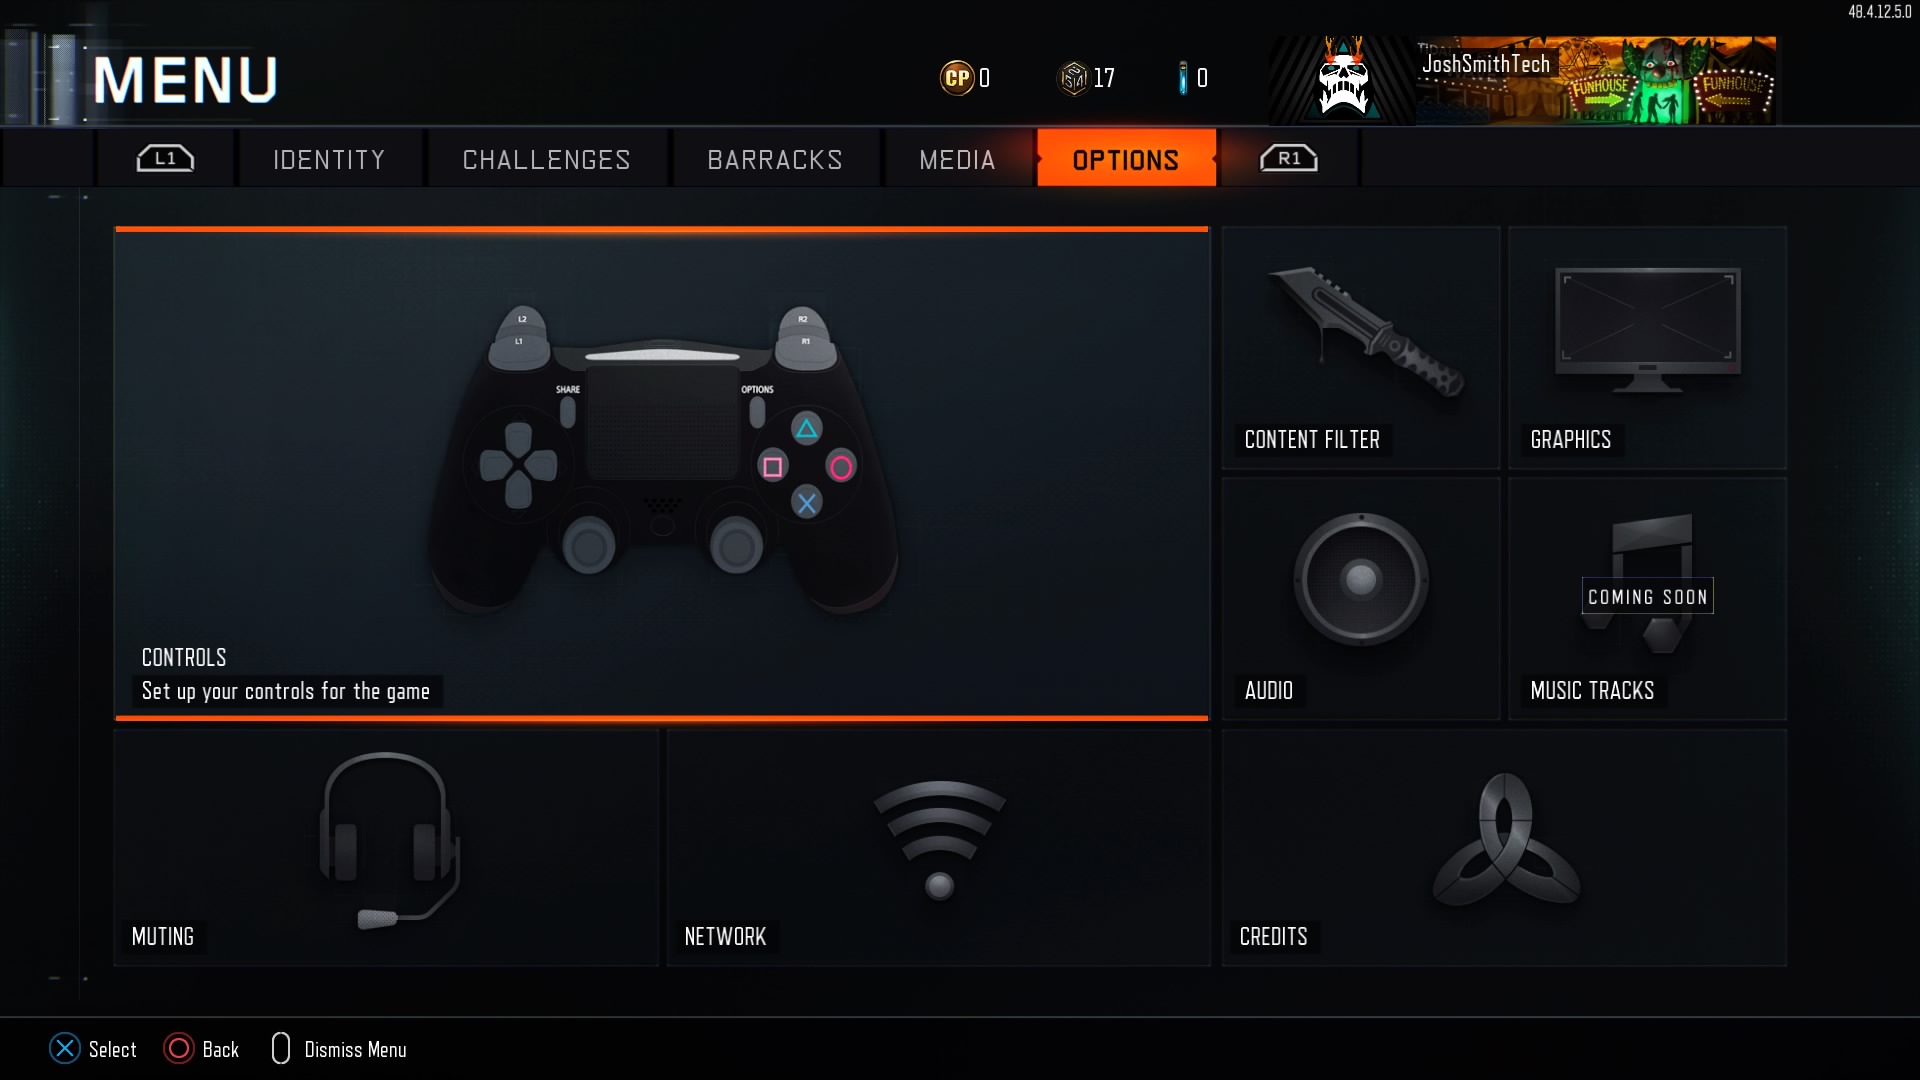 ps4 controller black ops 3